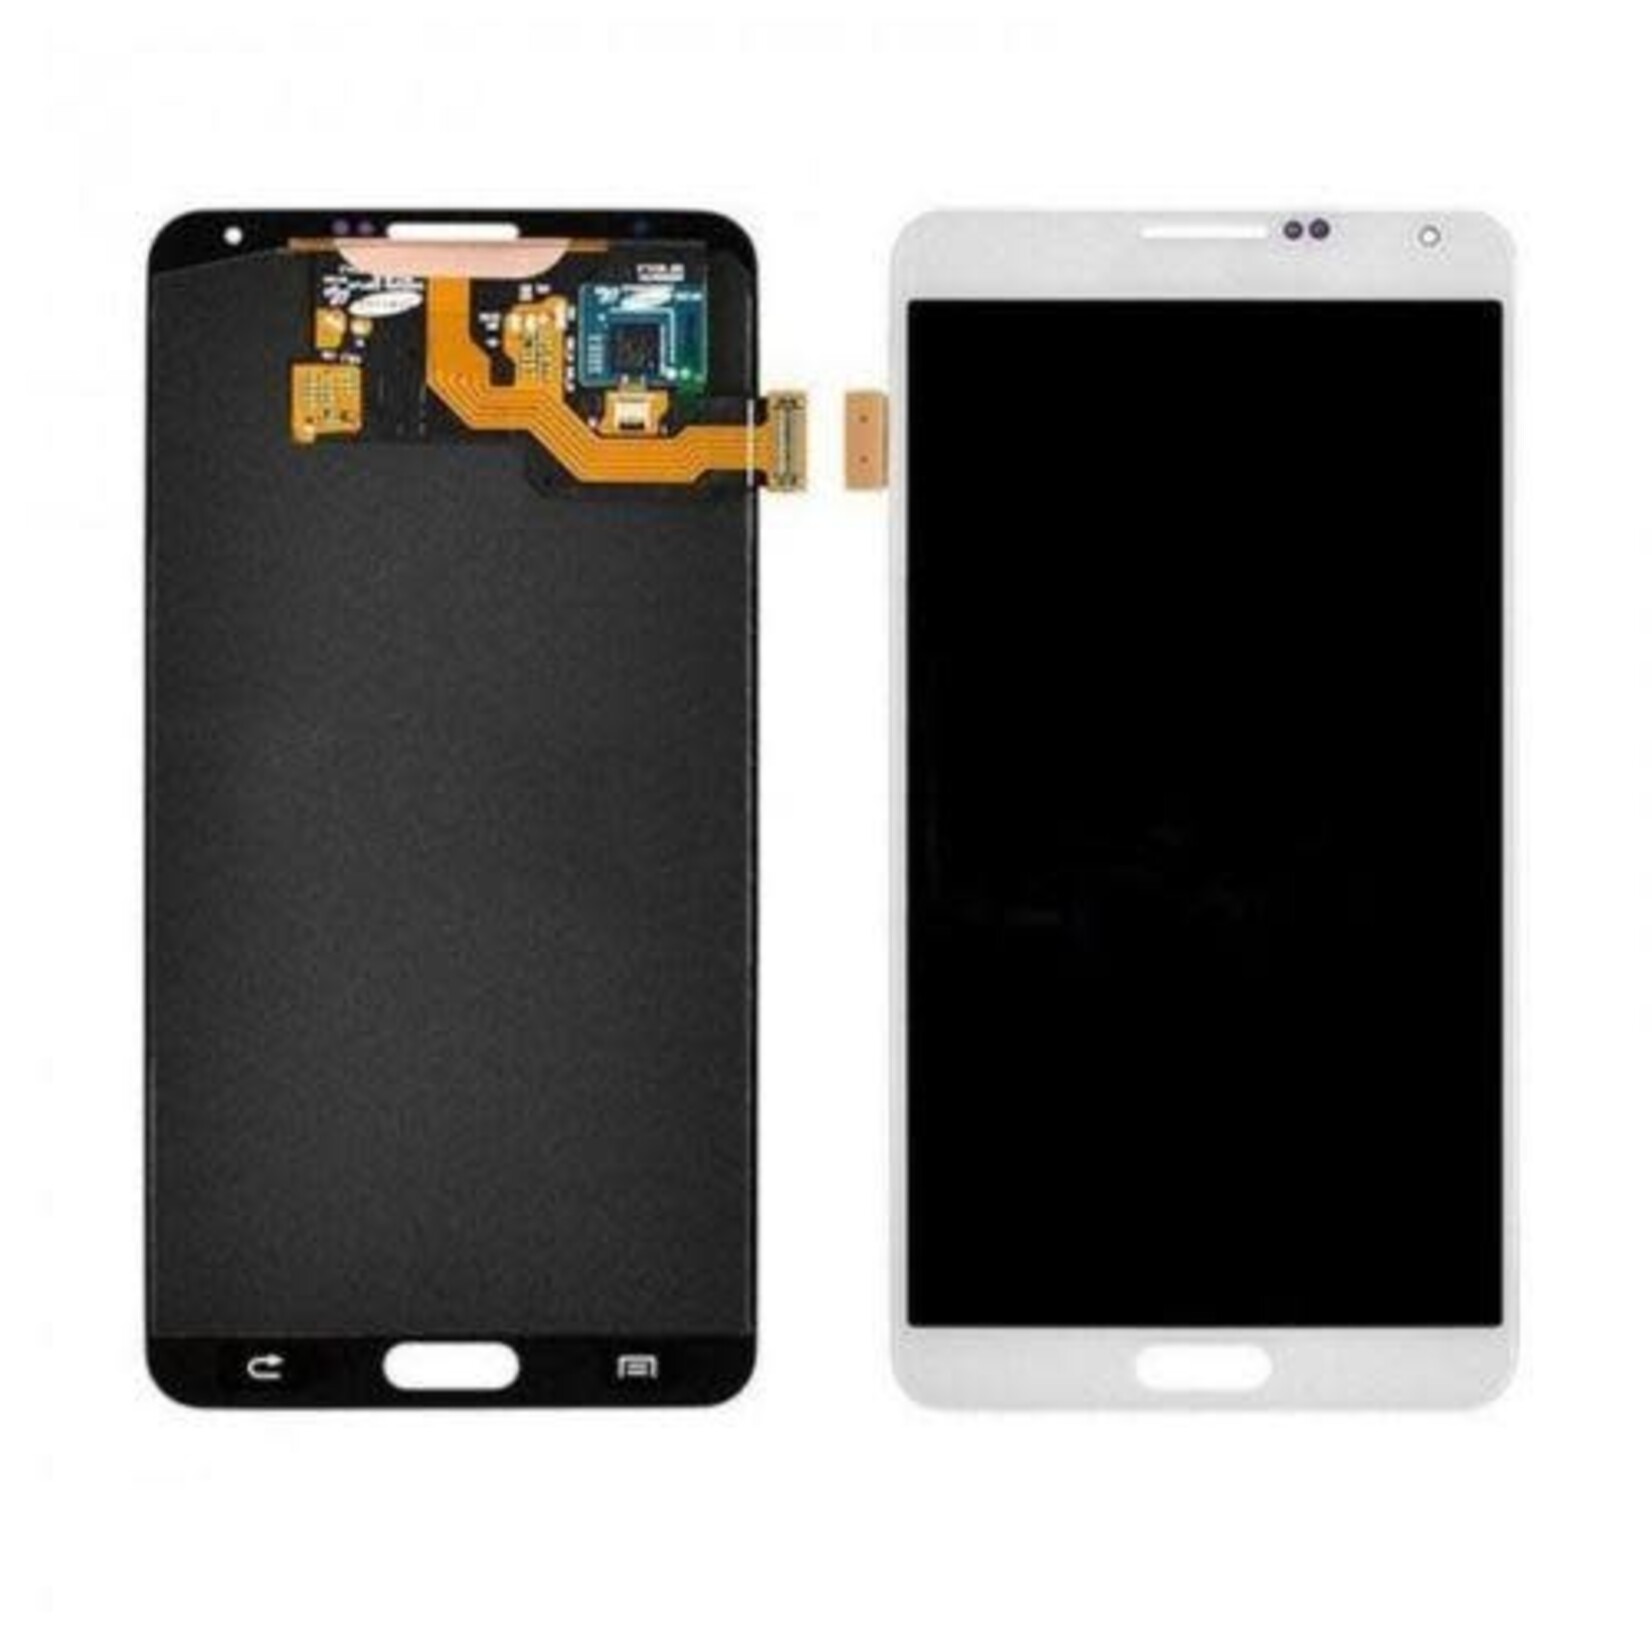 Samsung LCD DIGITIZER ASSEMBLY FOR SAMSUNG GALAXY NOTE 3